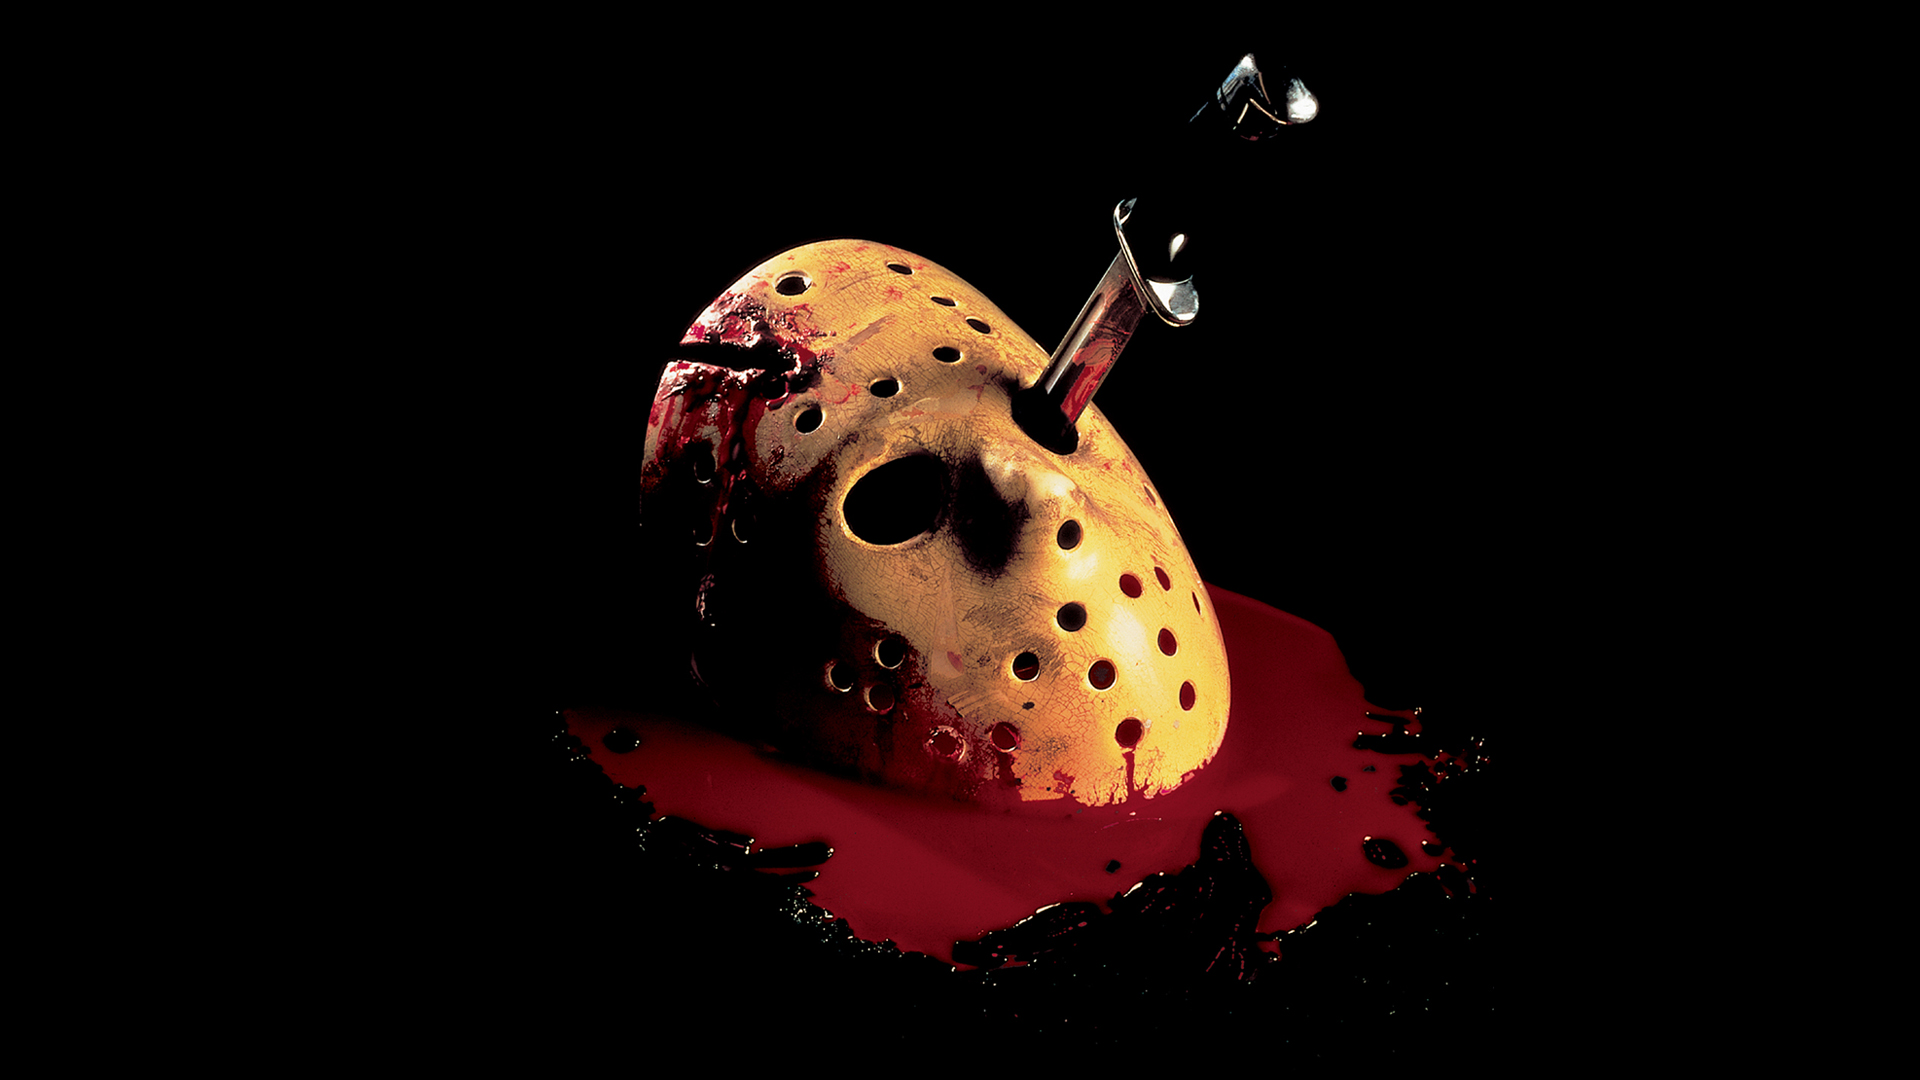 Friday The 13th Backgrounds, Compatible - PC, Mobile, Gadgets| 1920x1080 px